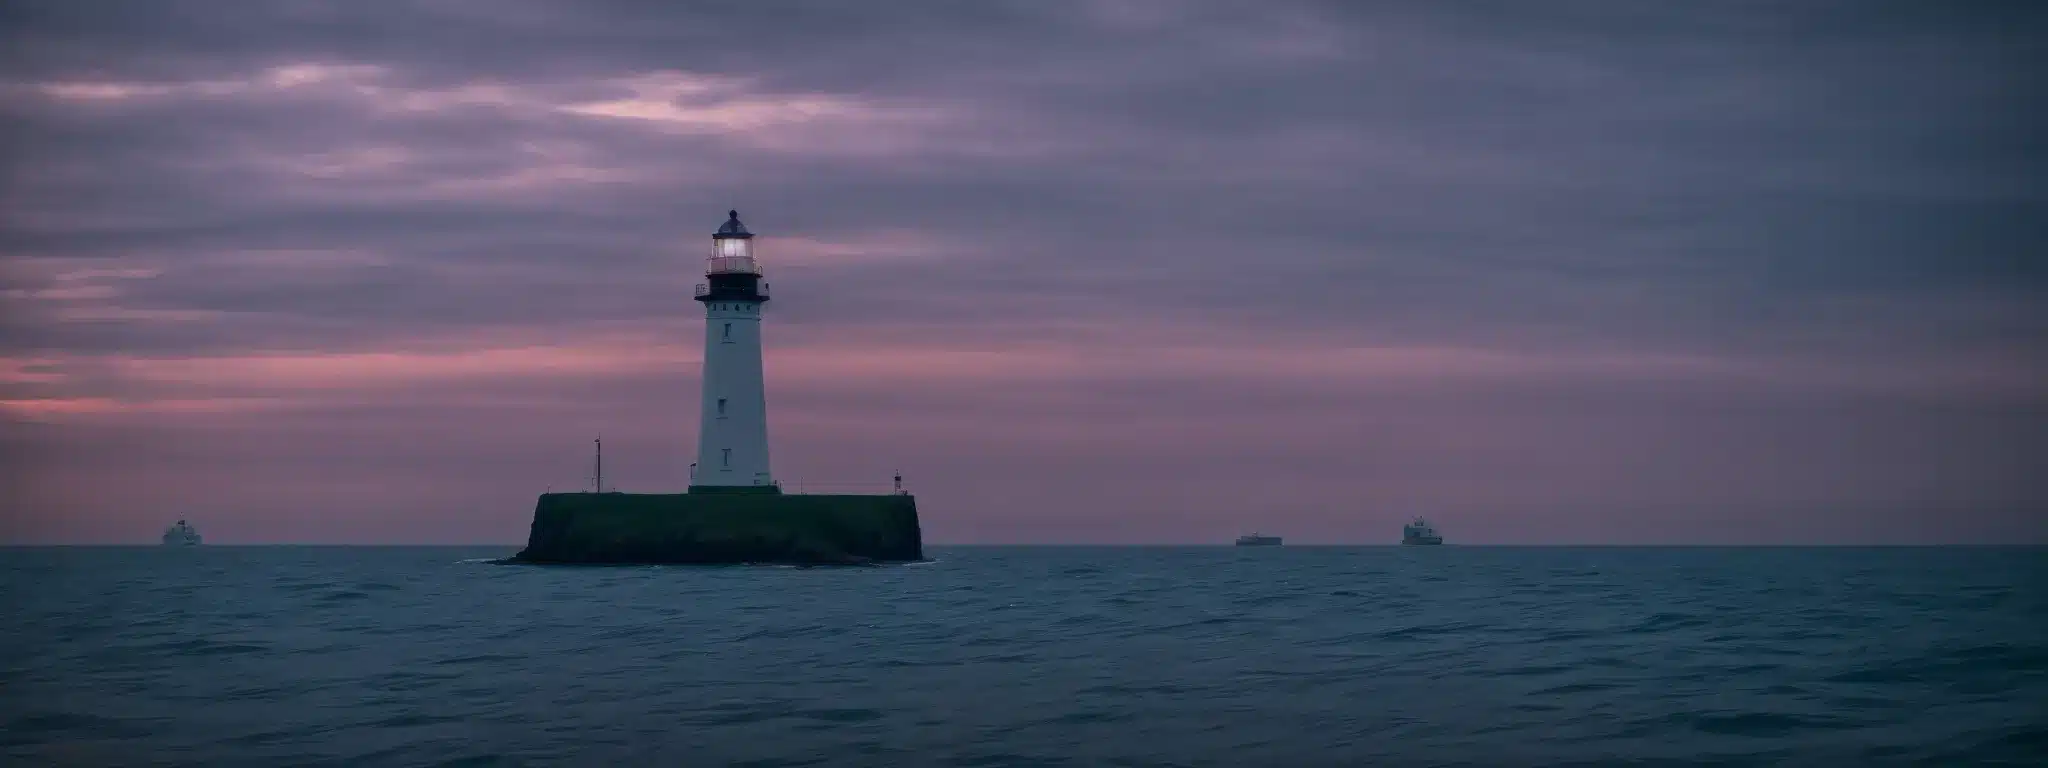 A Lighthouse Stands Firm, Guiding Ships Through The Twilight Sea Towards The Glowing Horizon.